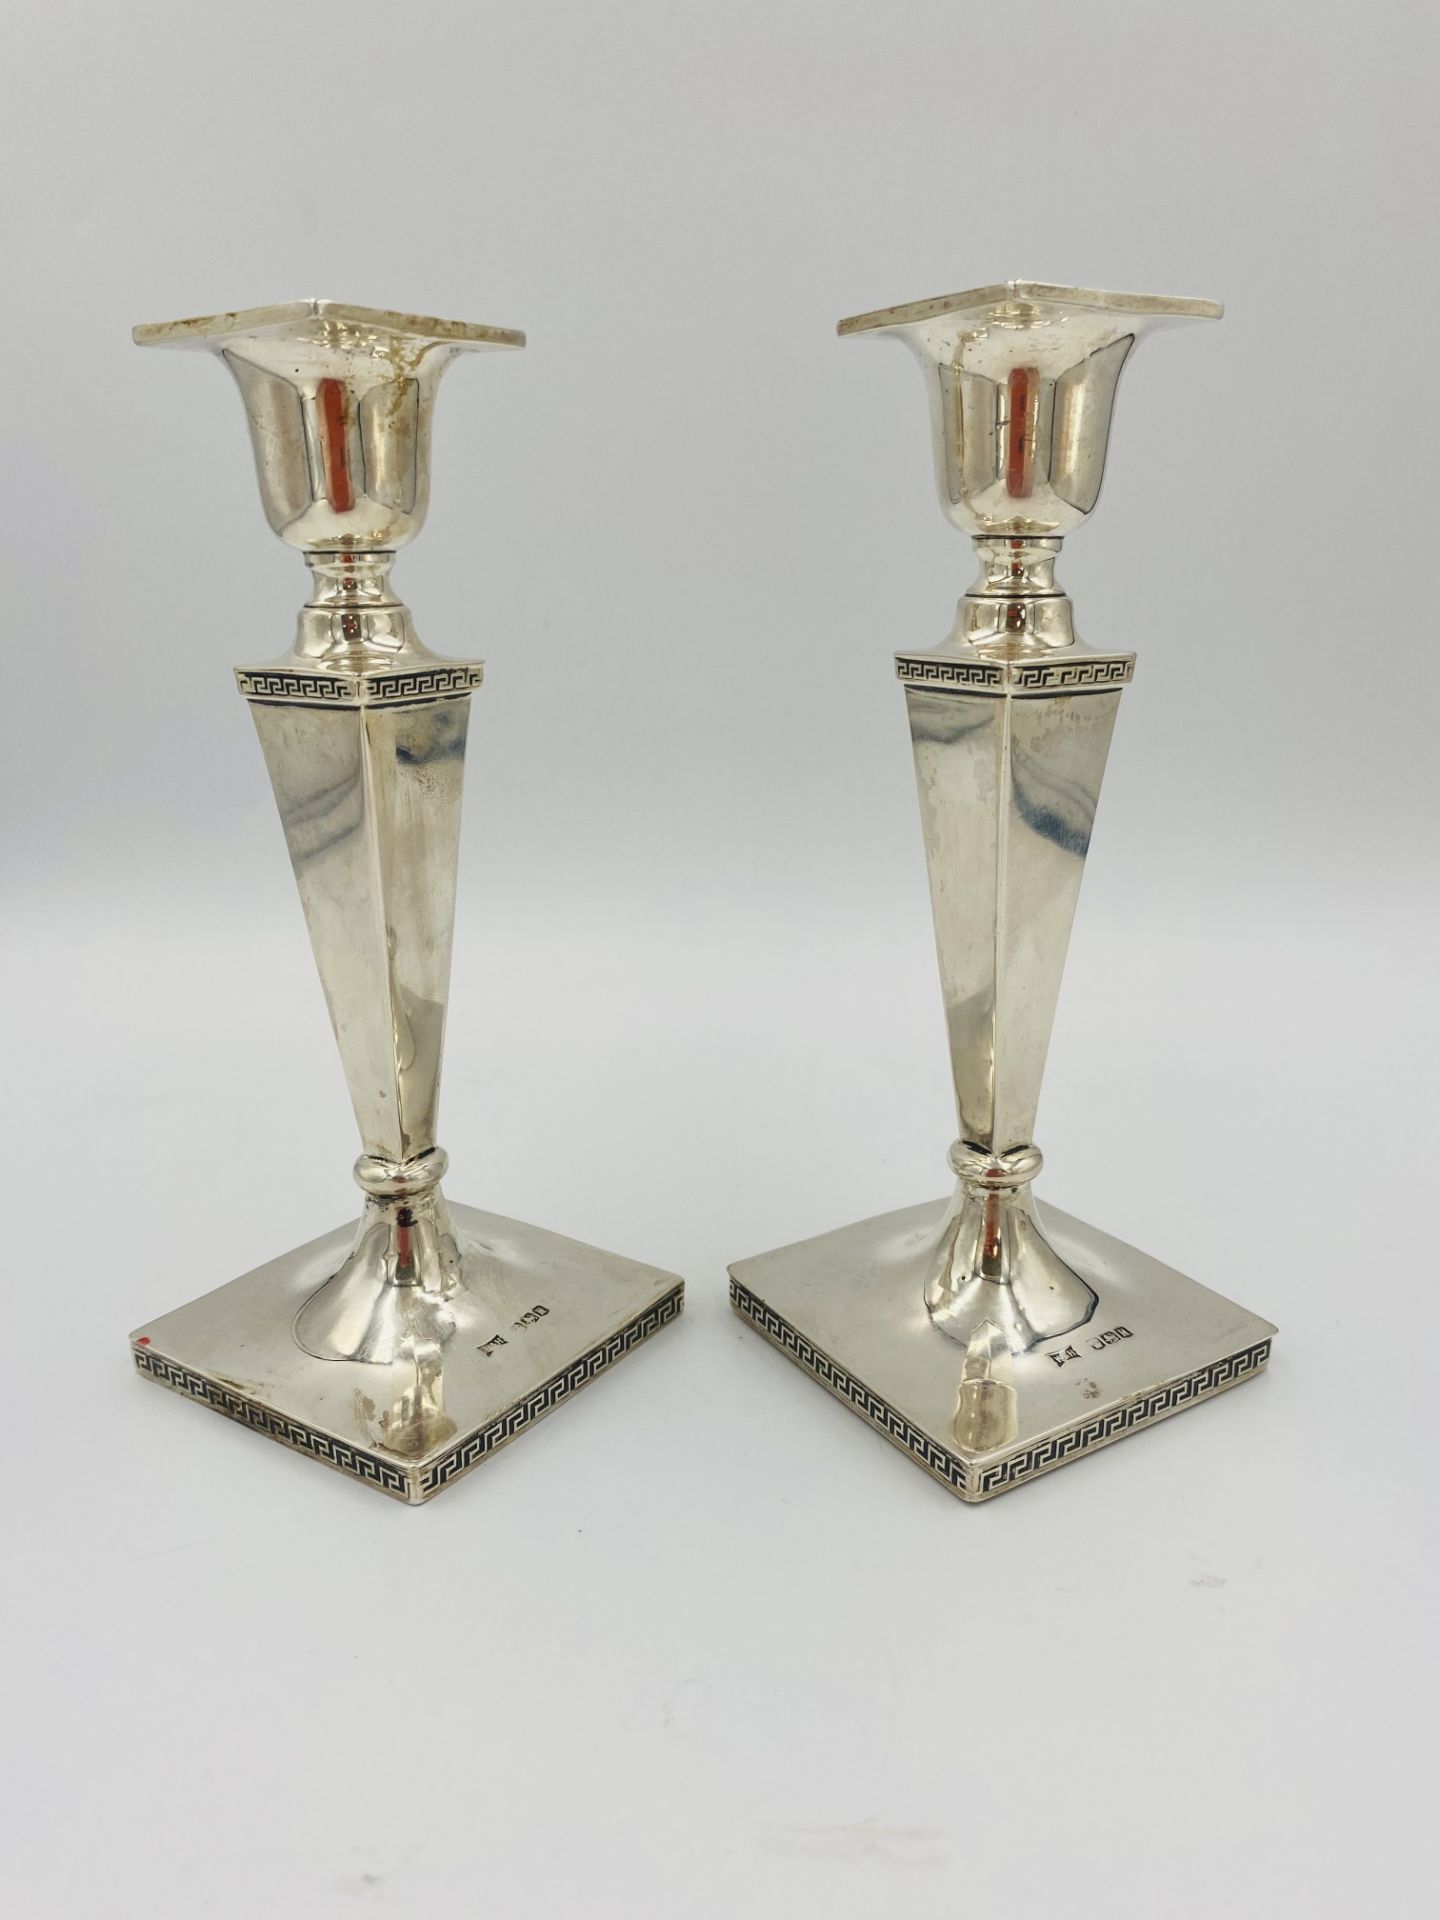 Pair of weighted silver candlesticks by Walker & Hall - Image 4 of 4